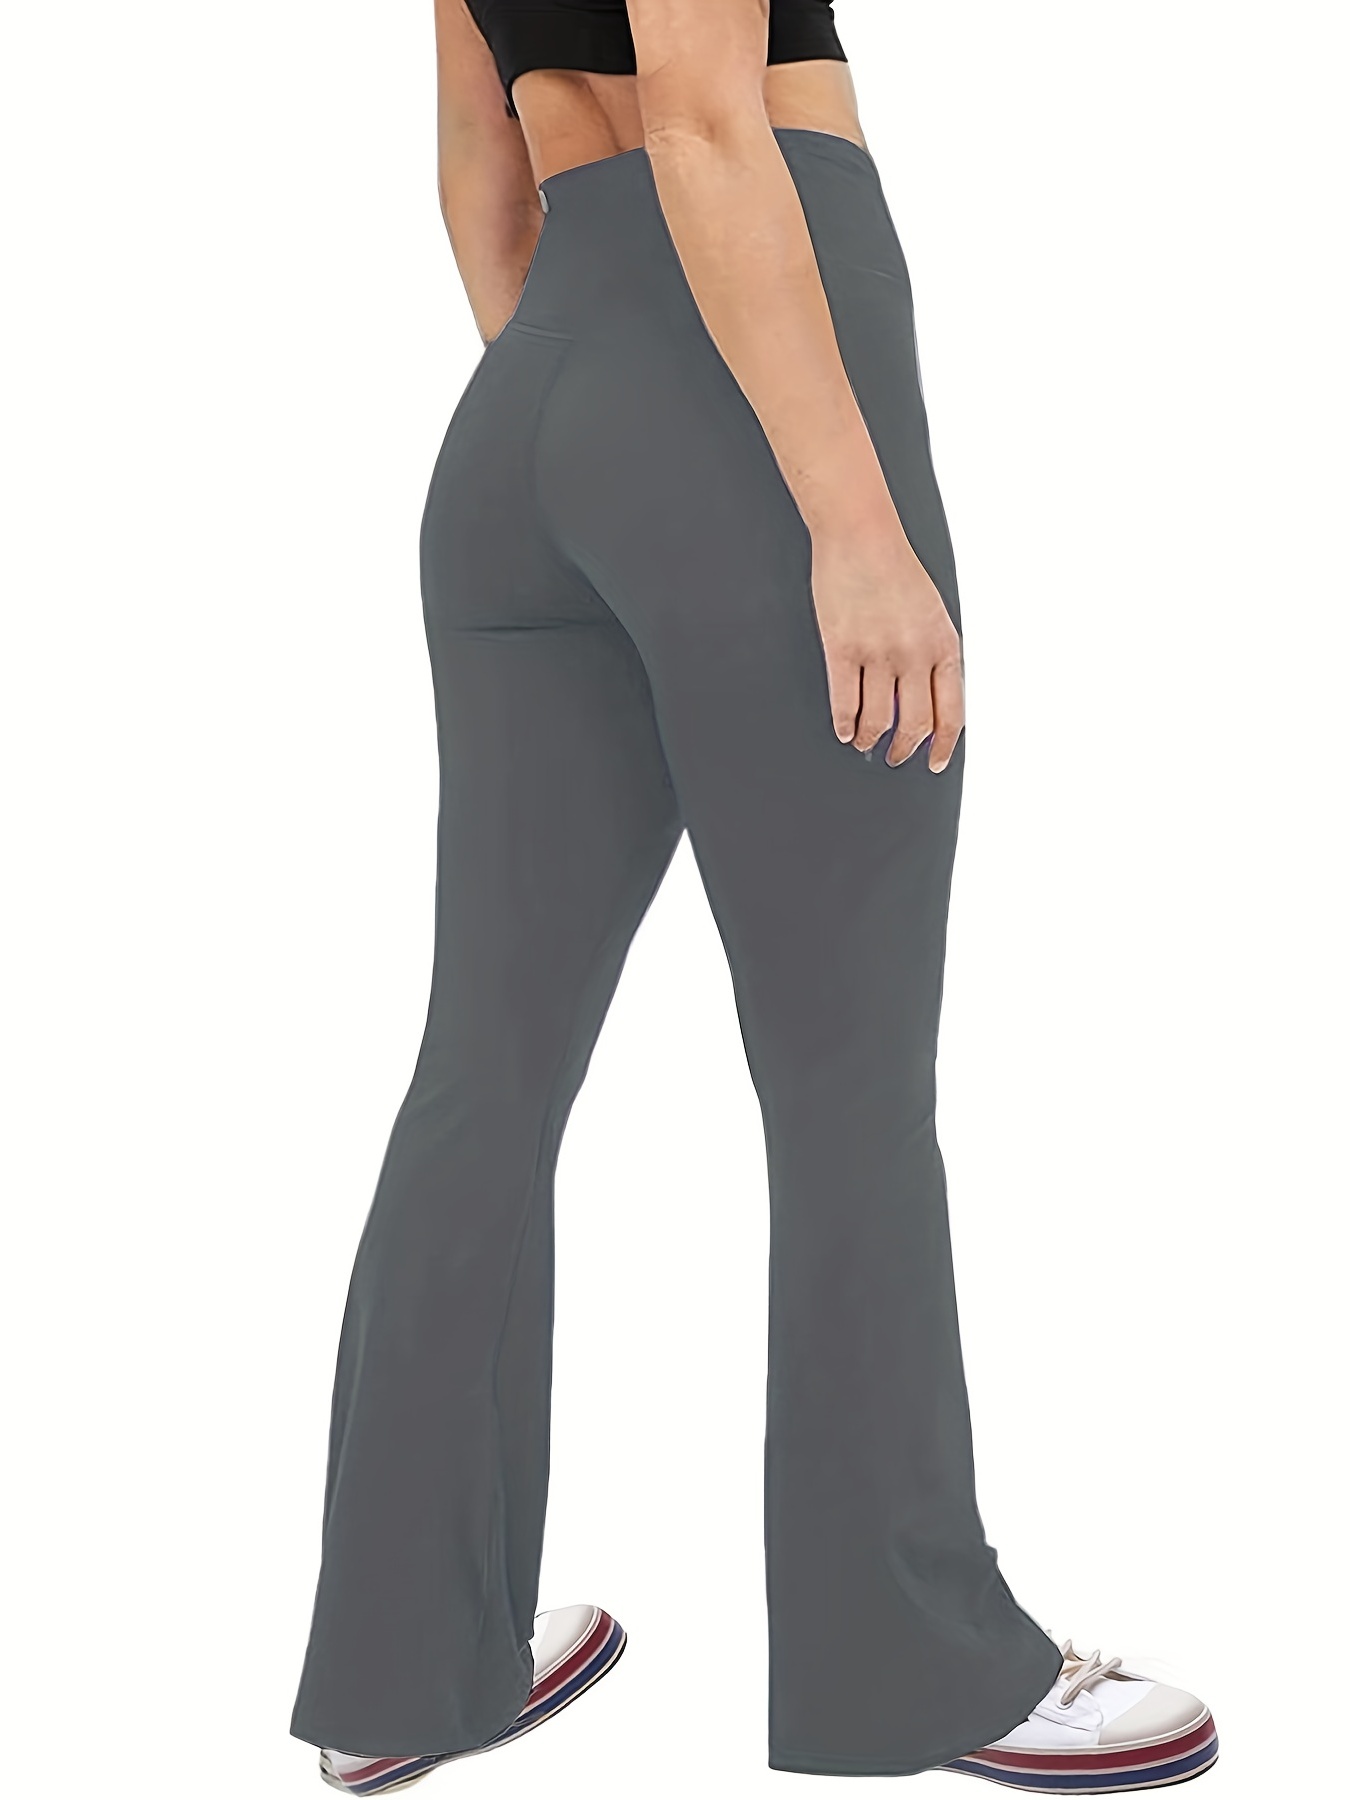 High Waist Flare Crossover Flare Leggings For Tall Women Perfect For Office  And Formal Wear From Cartwright, $18.52